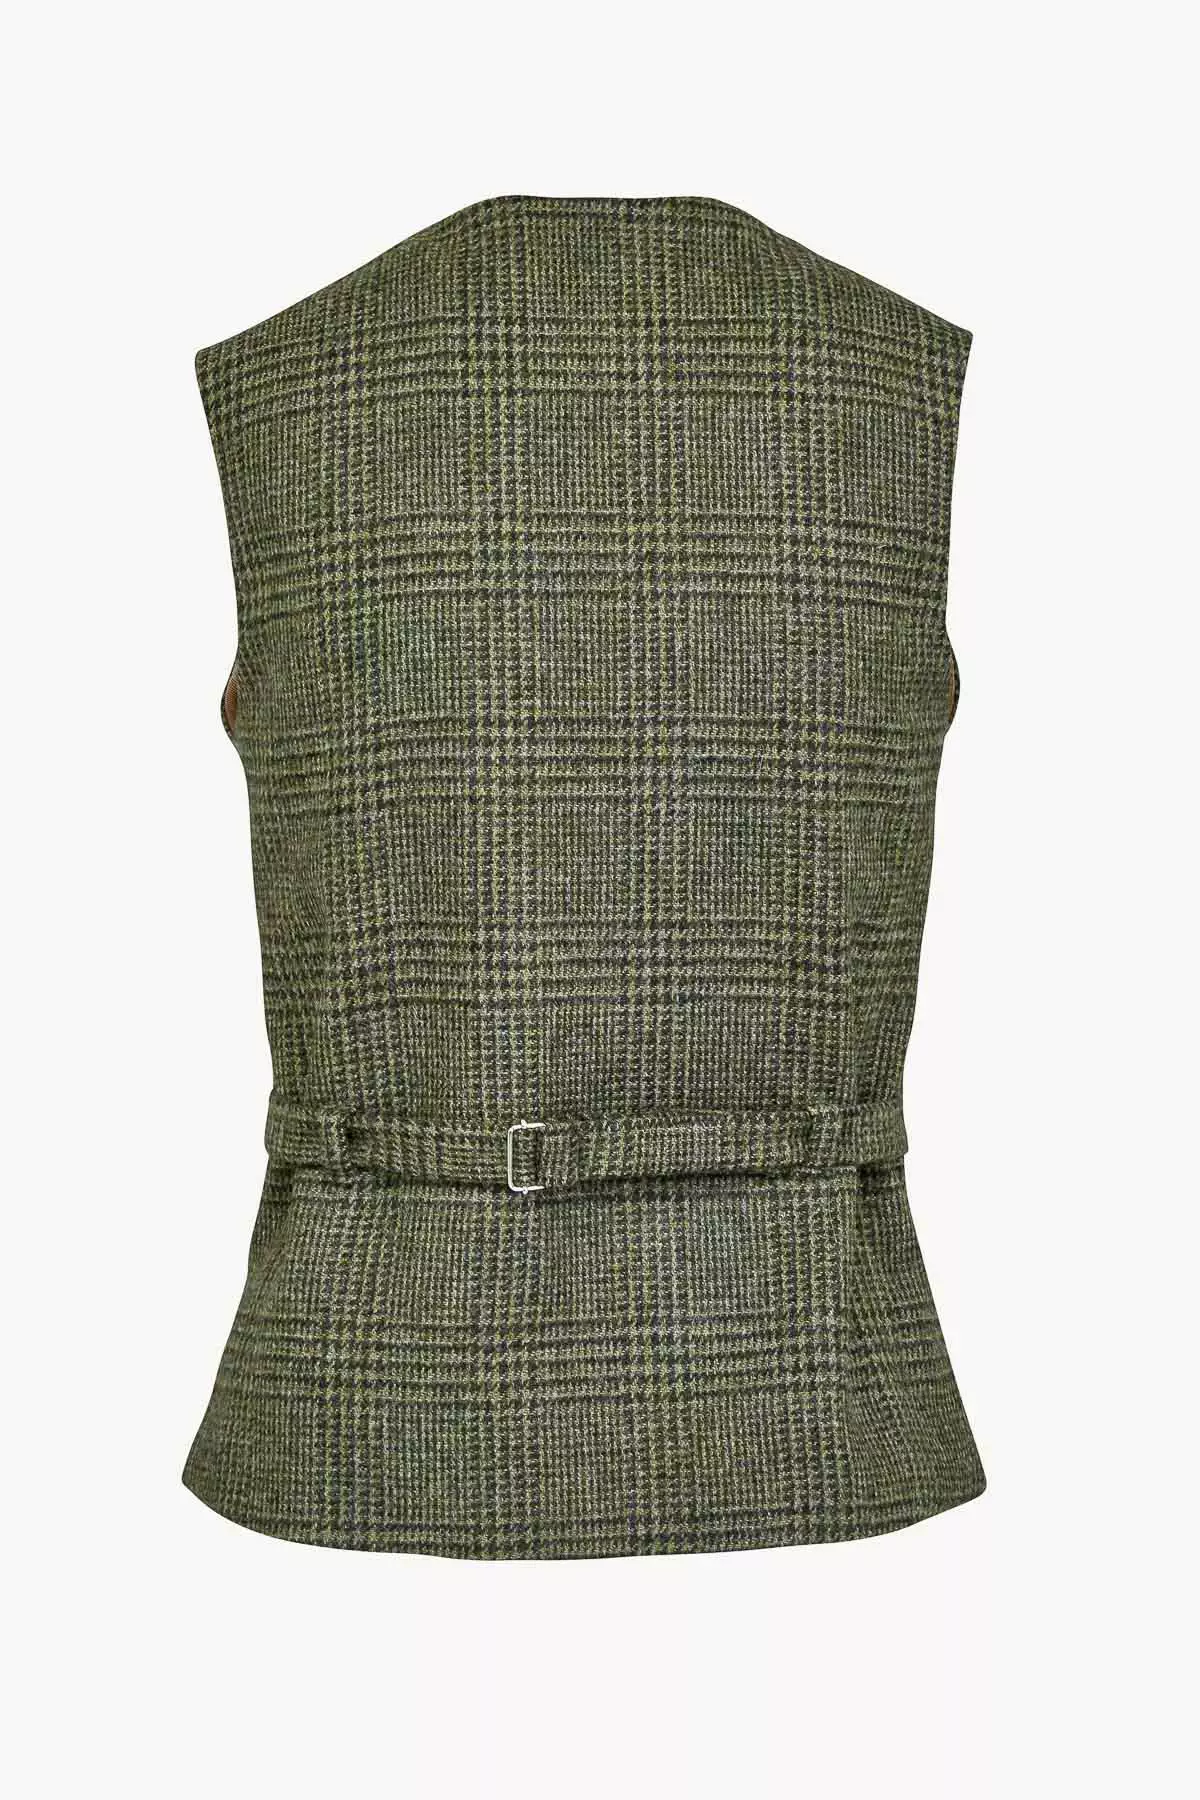 Lucia Vest in Wool Check - Giuliva Heritage